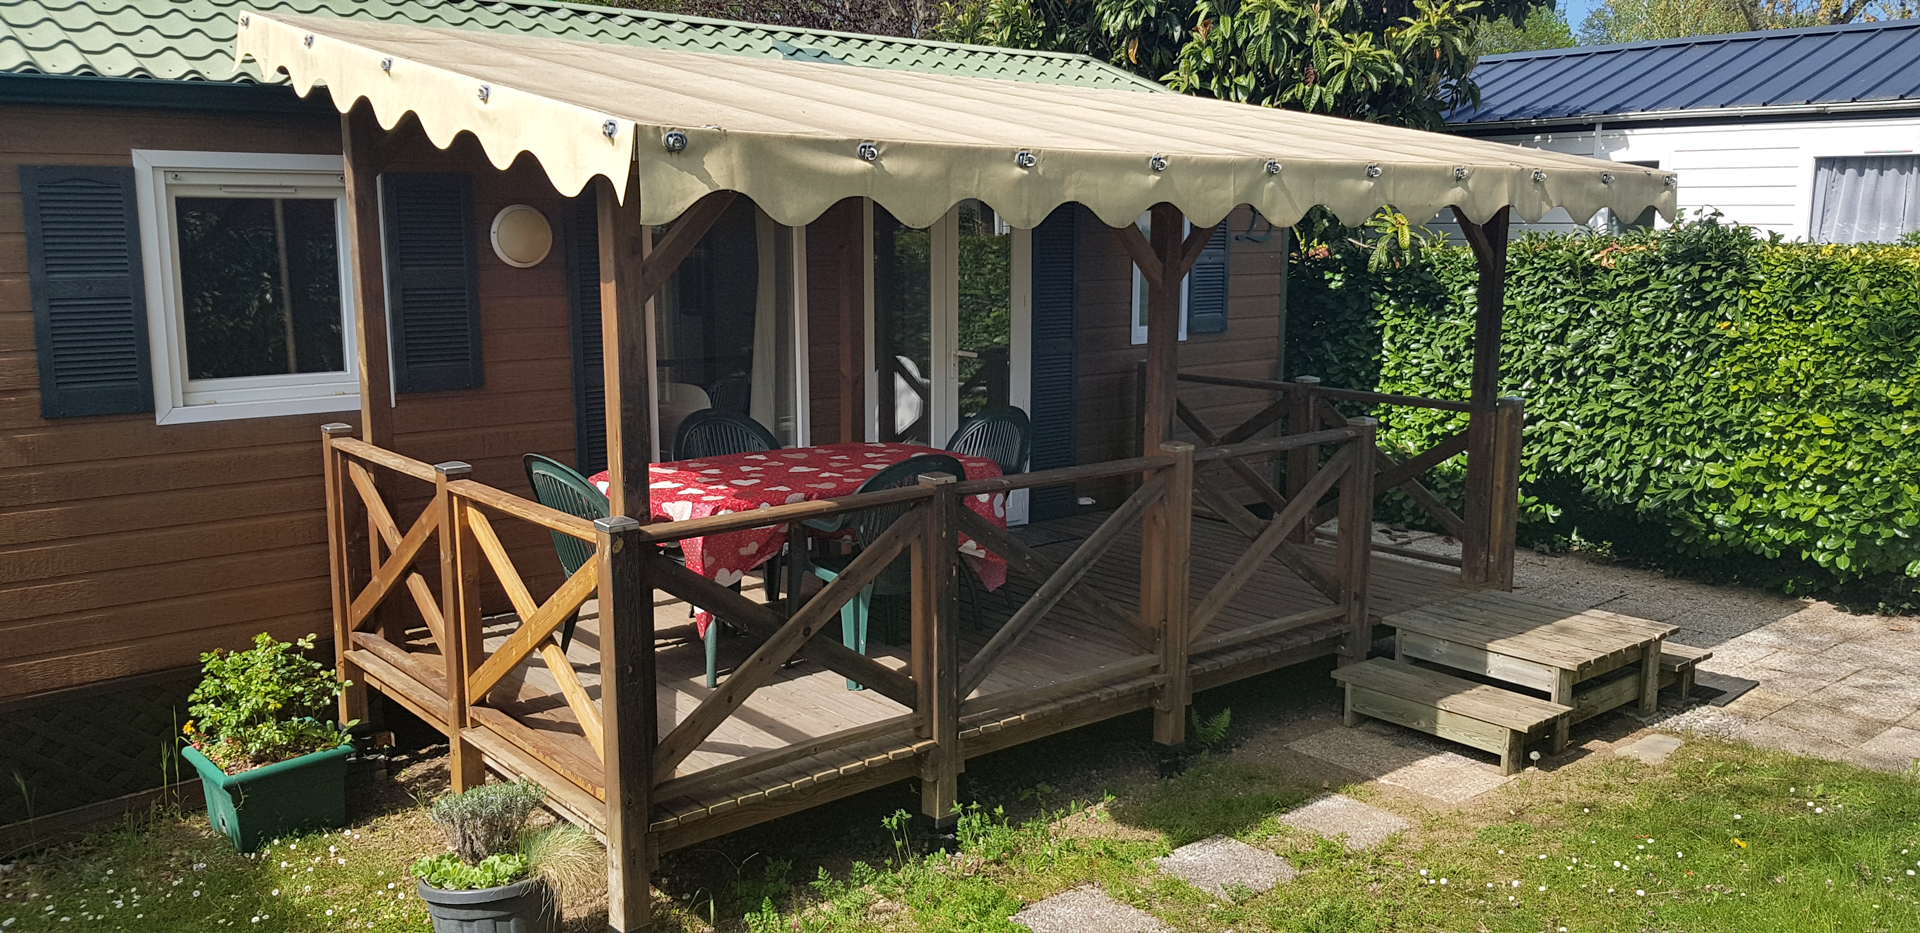 Accommodation - Mobile-Home 2 Bedrooms (Sumba) - Camping du Chatelet